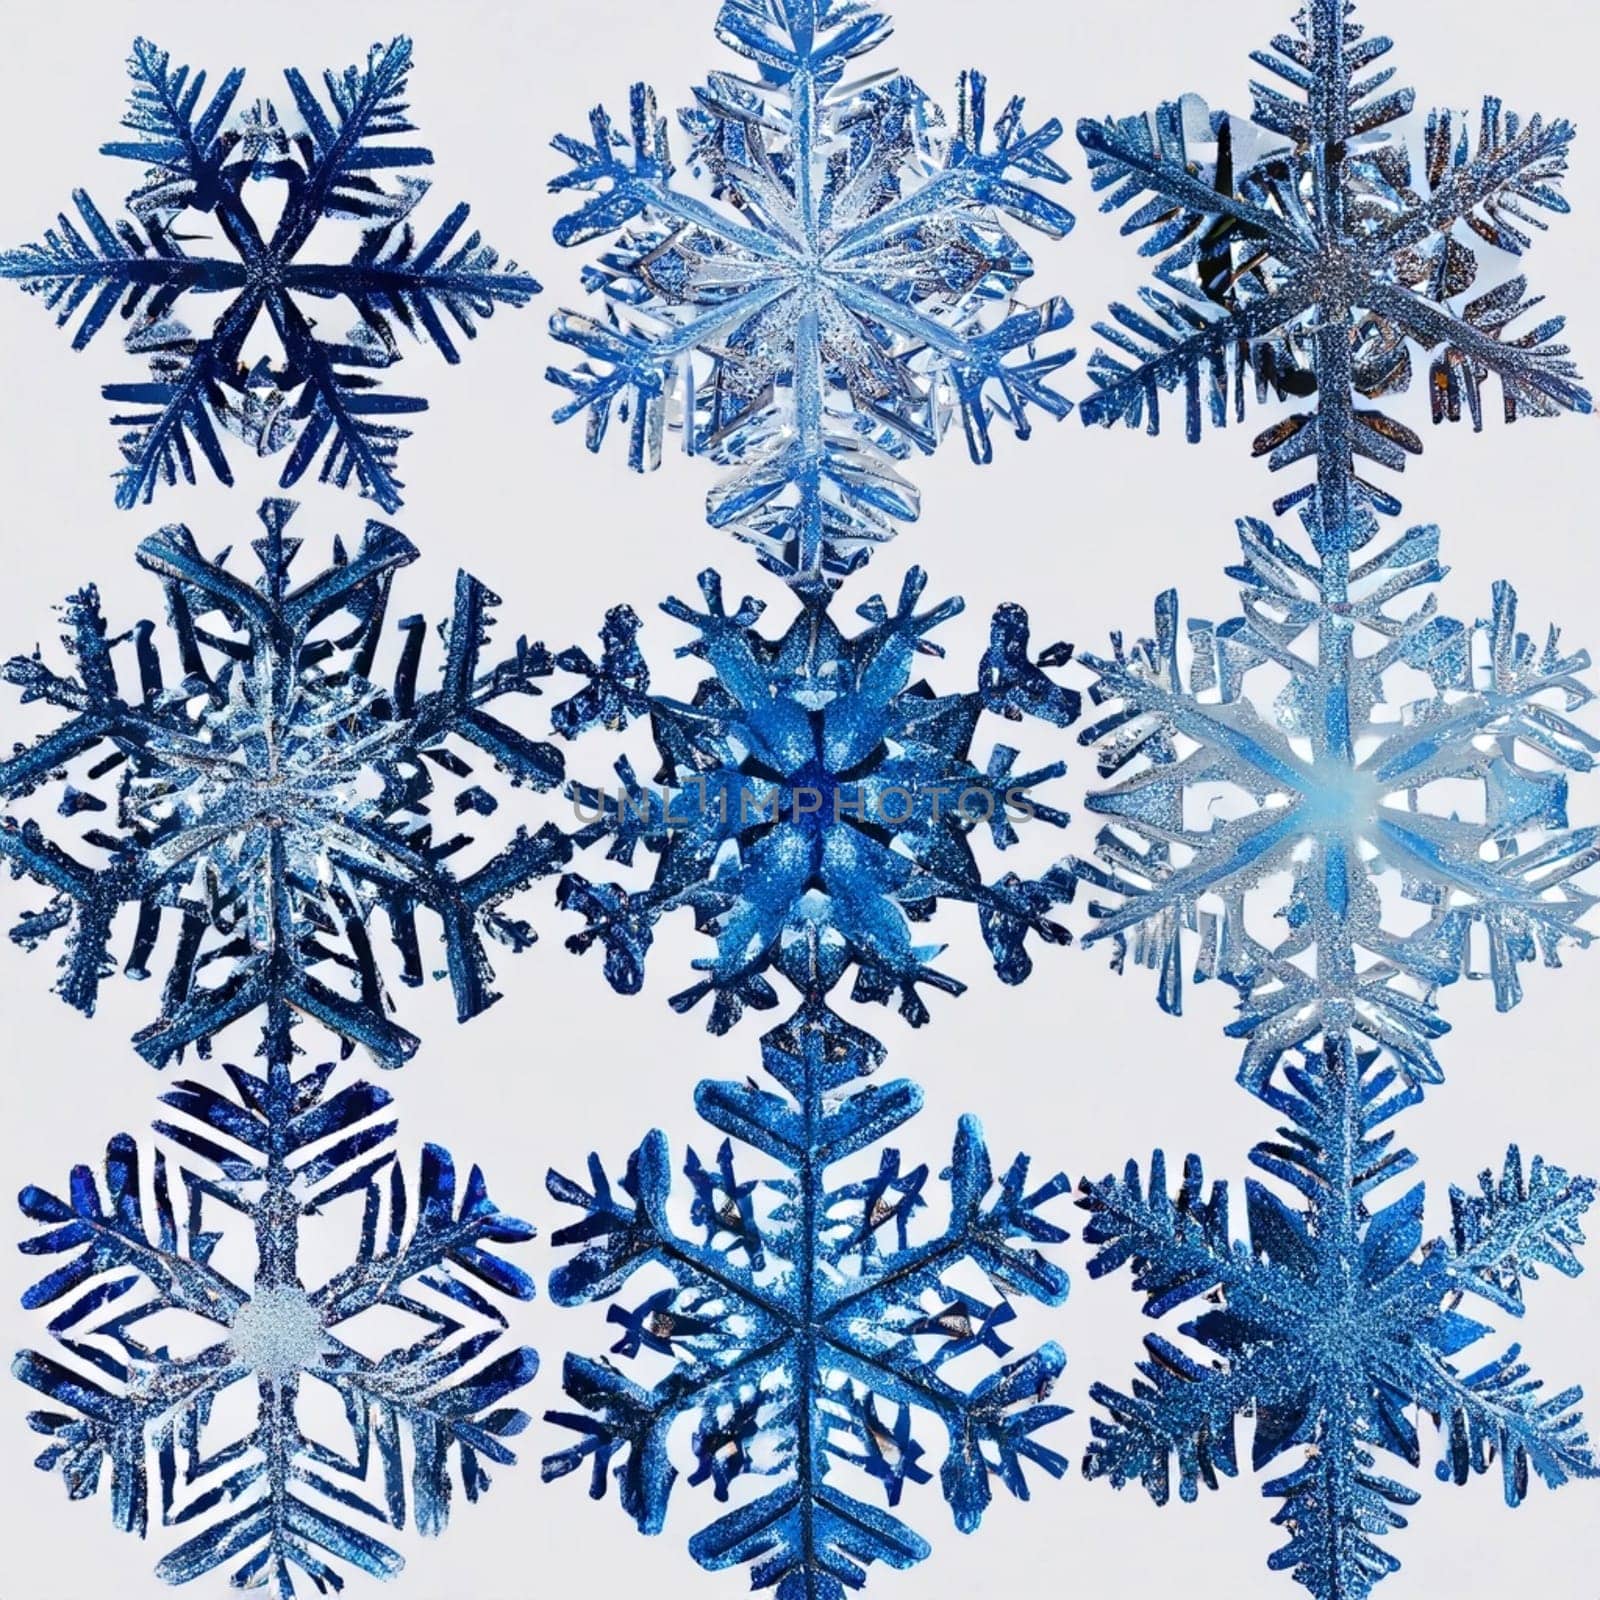 set of snowflakes. global colors used. elements grouped. Snowflake Decoration Christmas Winter set of snowflakes features unique and intricate designs, capturing the beauty and wonder of winter. by Costin